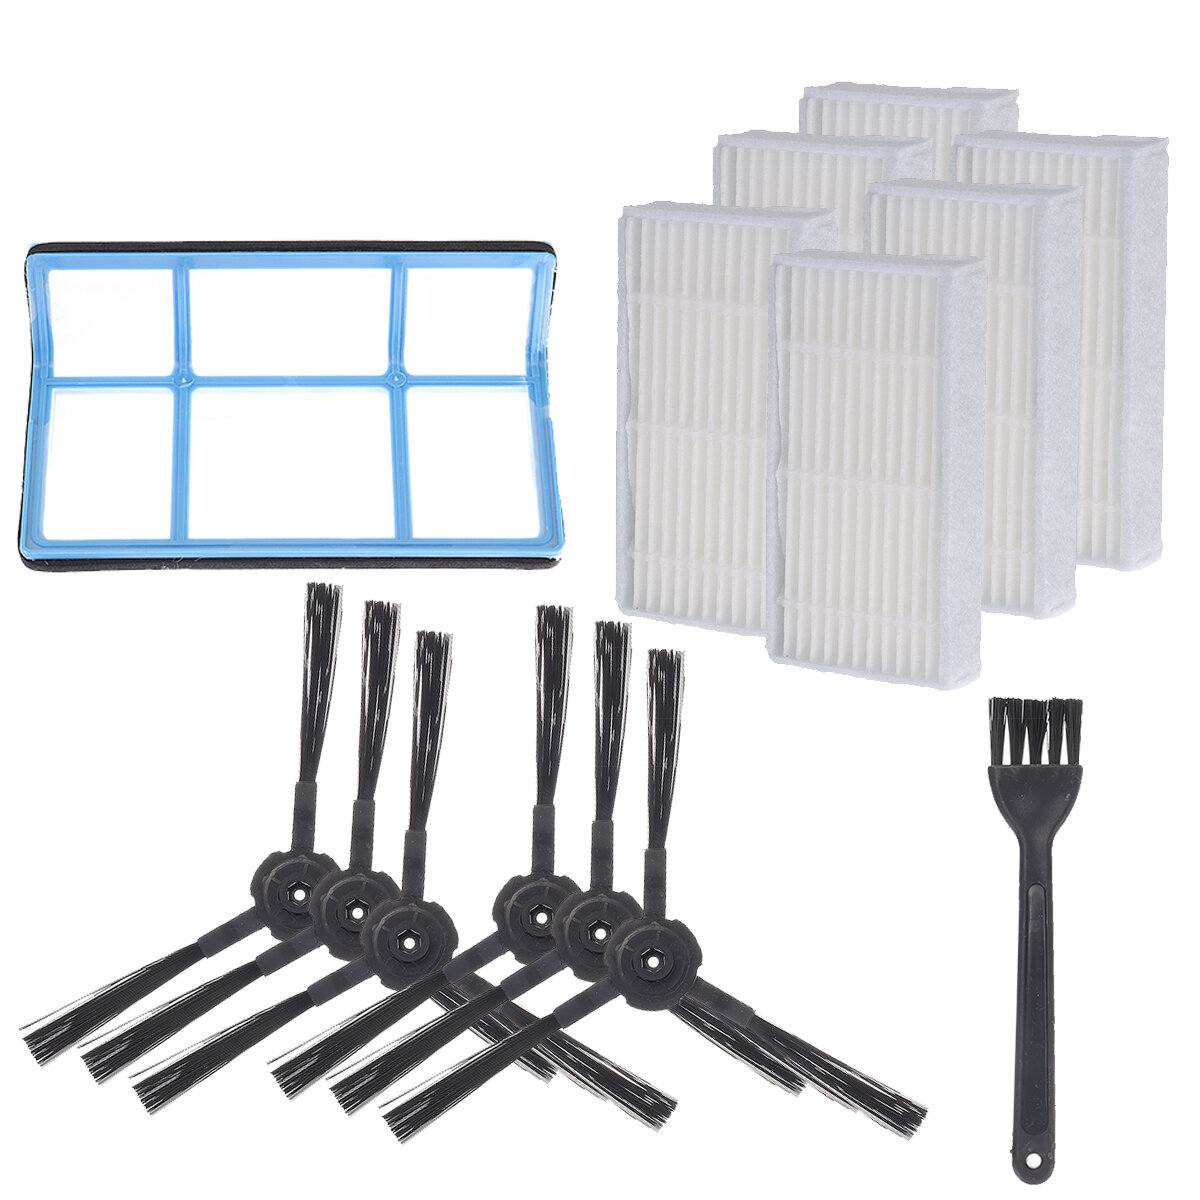 

14pcs Replacements for ILIFE V3 V3S V5 V5S Pro Vacuum Cleaner Parts Accessories Side Brushes*6 HEPA Filters*6 Primary Fi